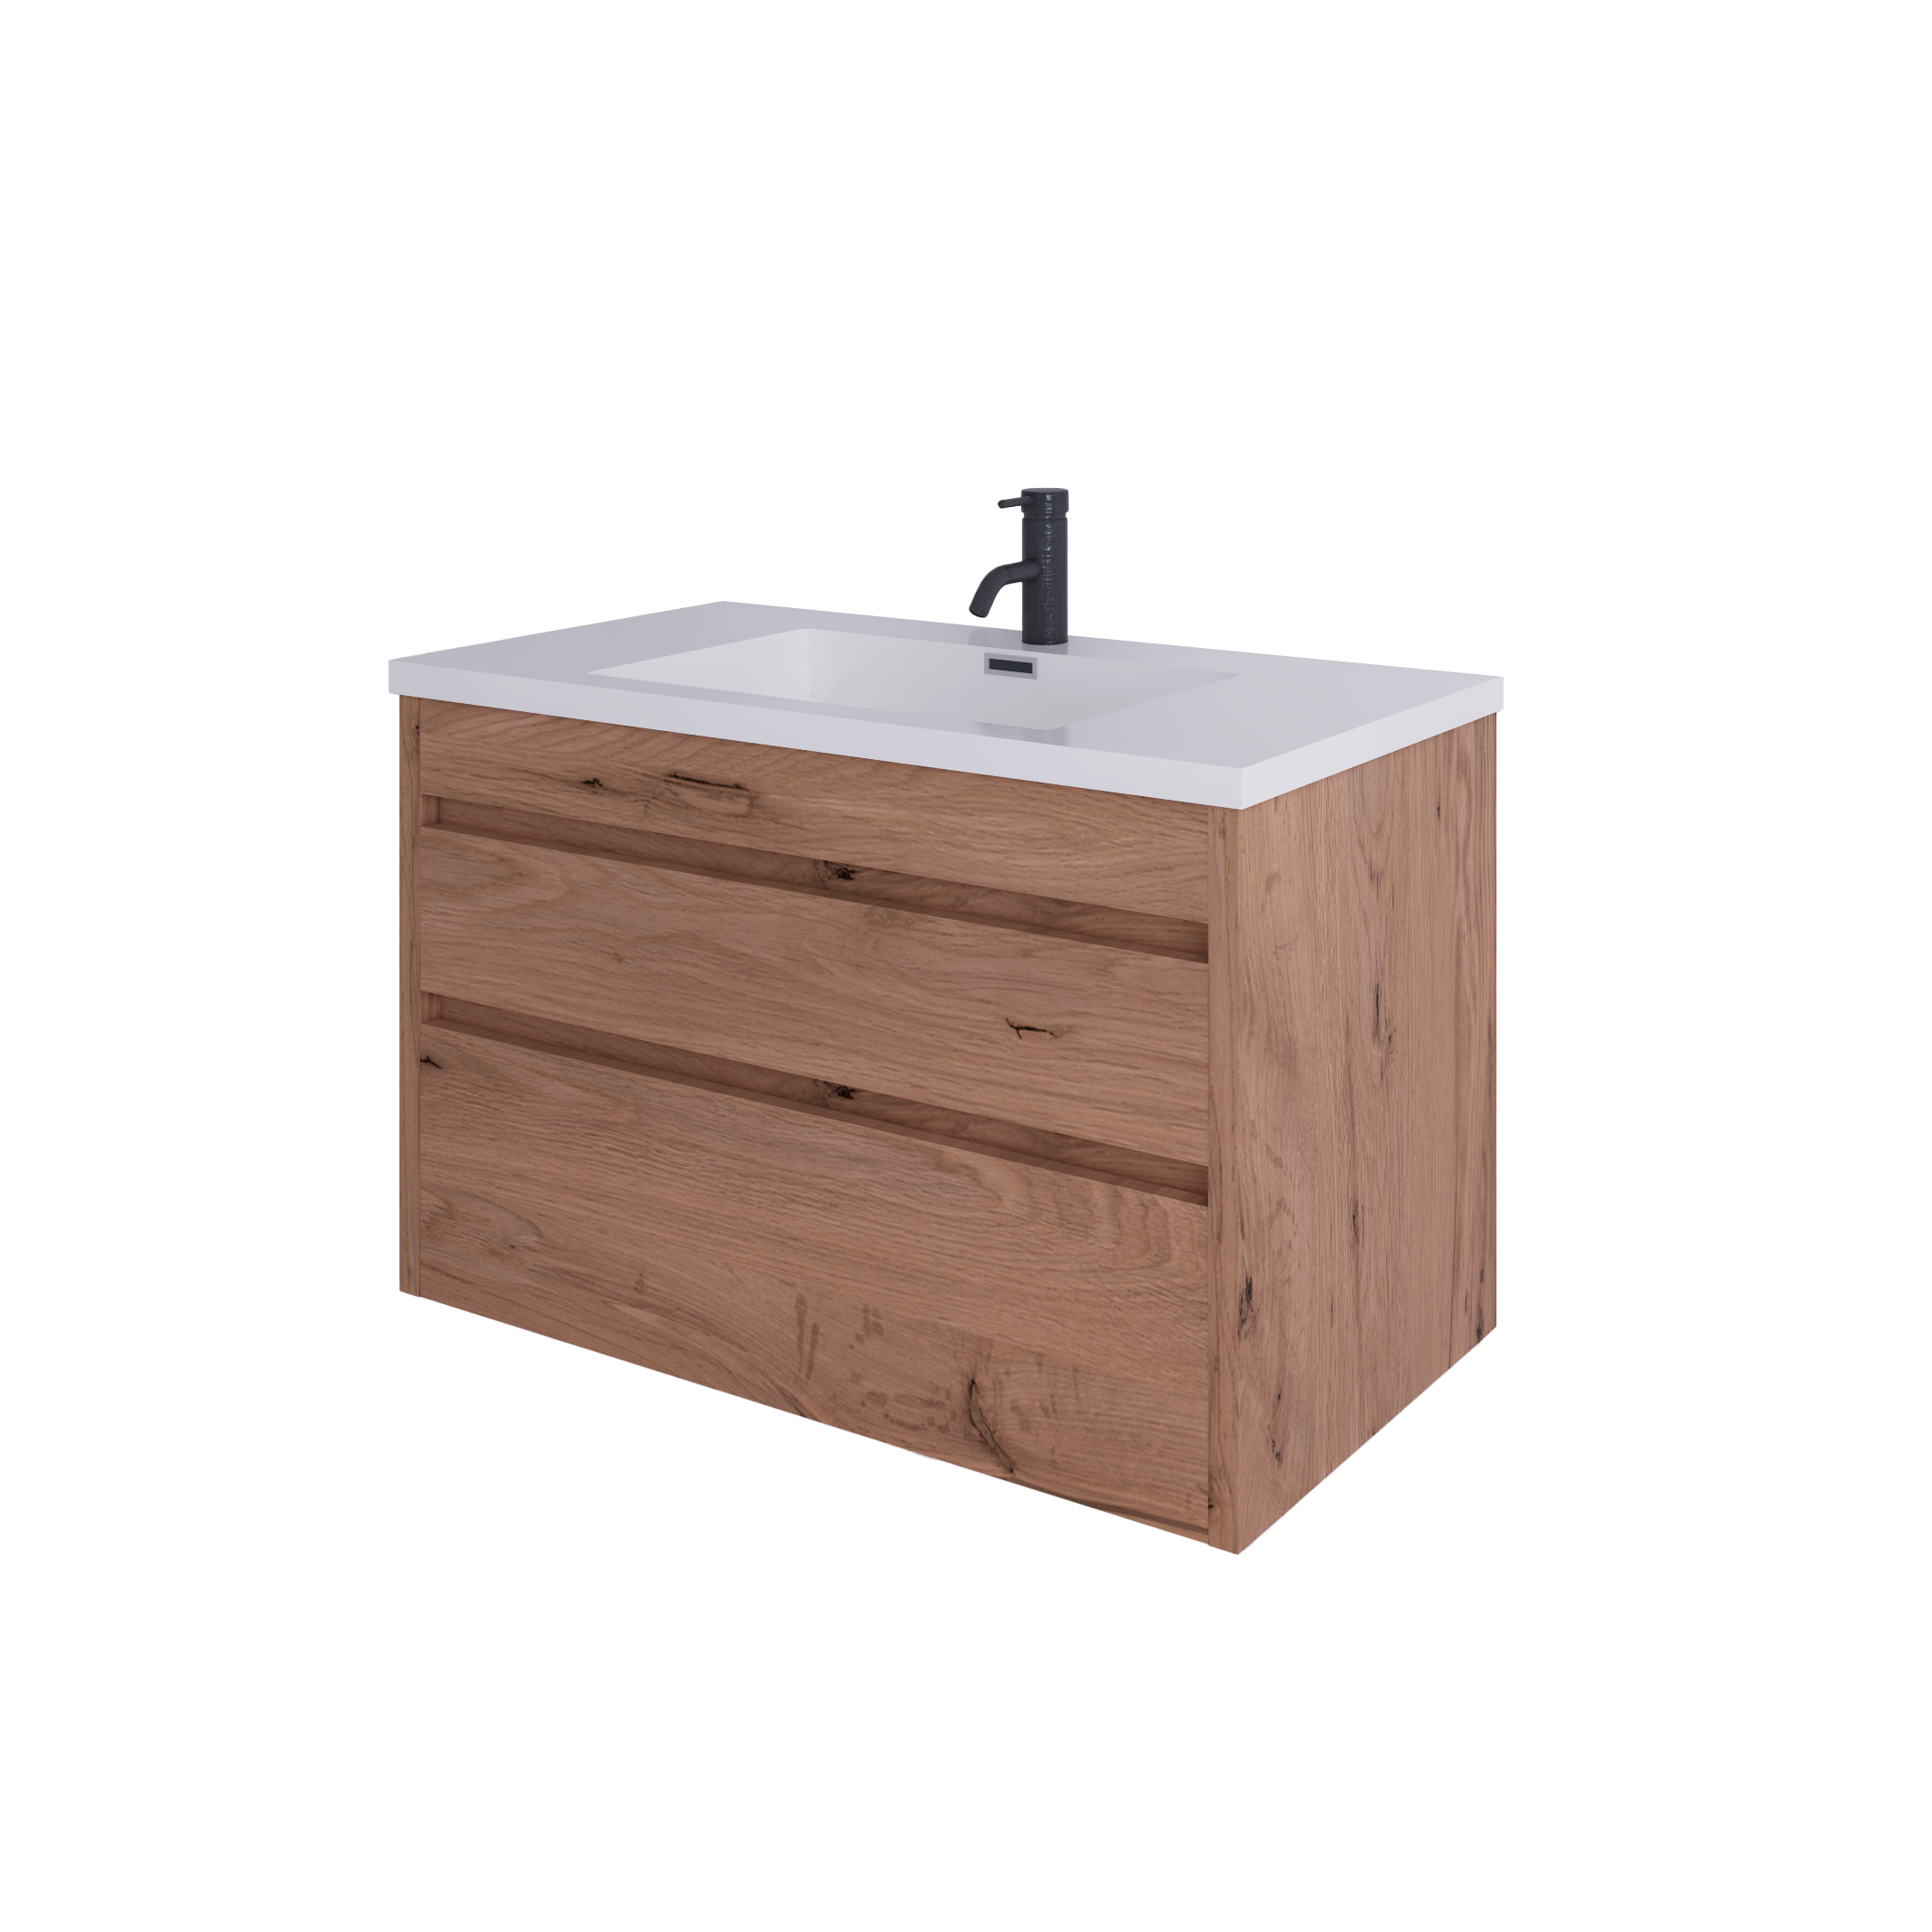 LUX 900 2 DRAWER WALL-HUNG VANITY